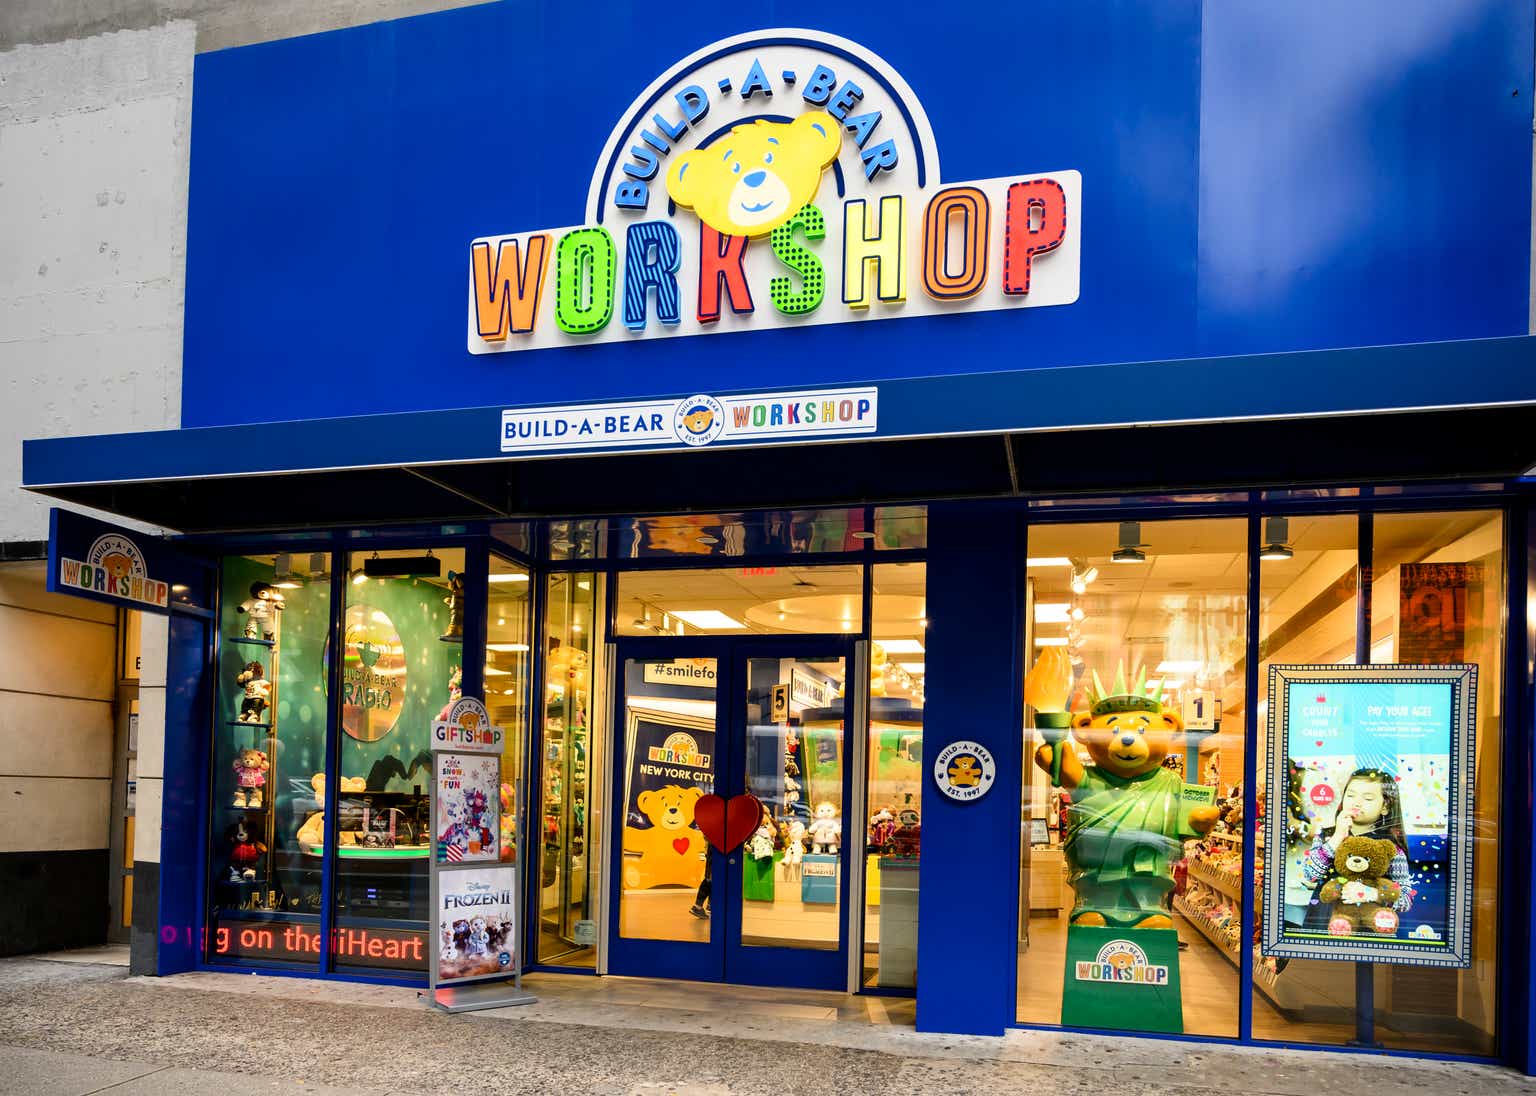 Build-A-Bear Workshop: Financial Fortitude, Priced At 6x Operating Profits